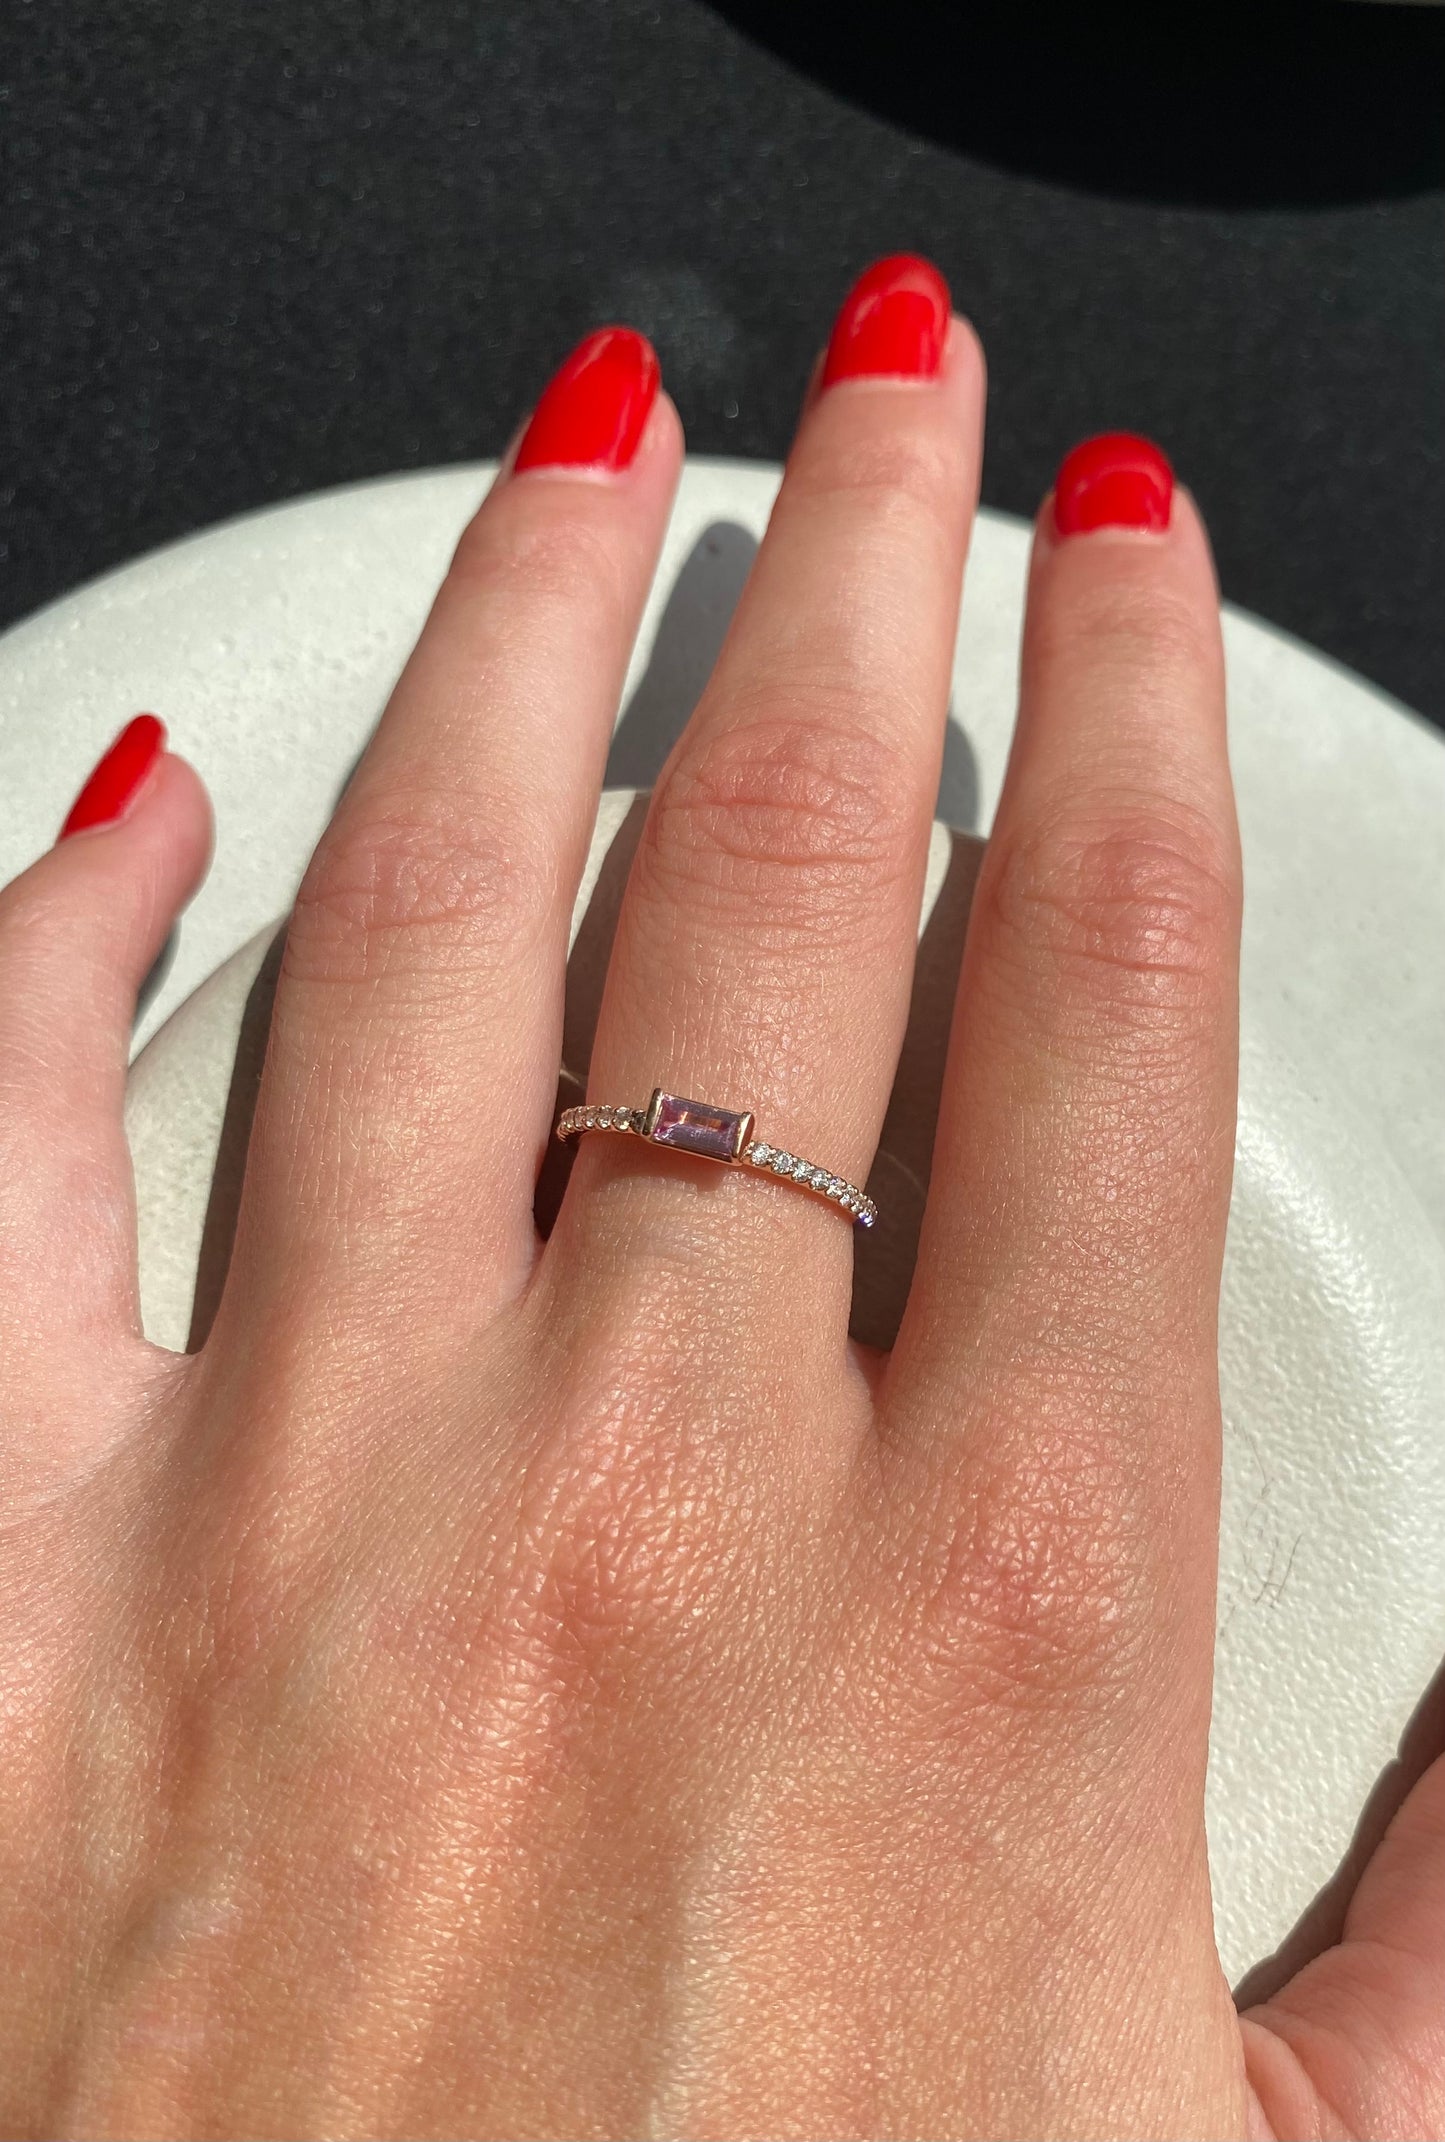 Pink Sapphire Baguette and Diamond Ring